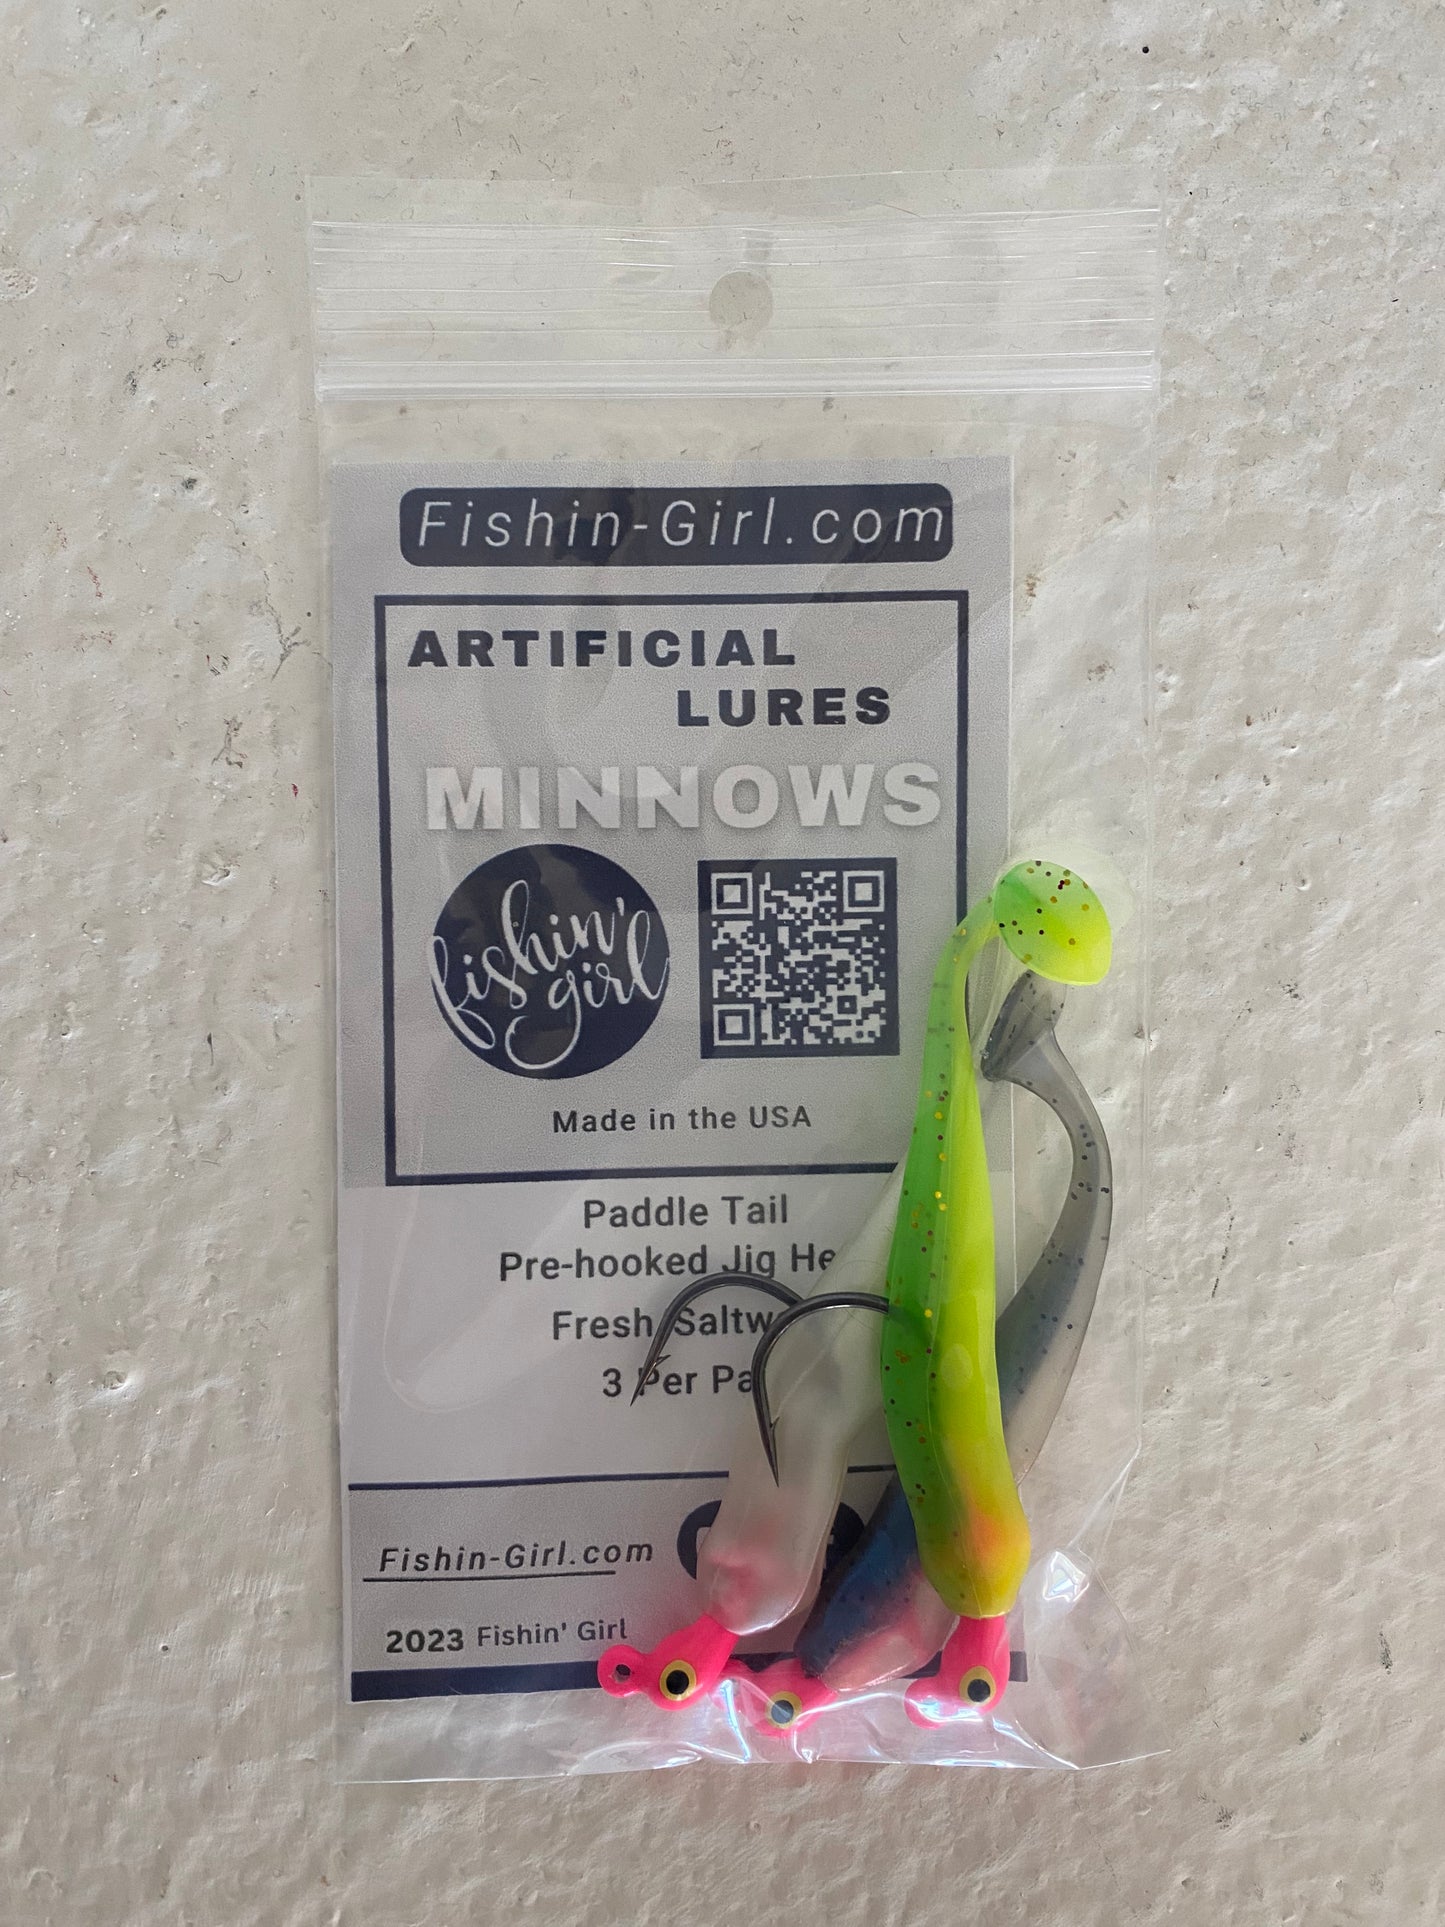 Artificial Lures - Frogs, Minnows or Shrimp